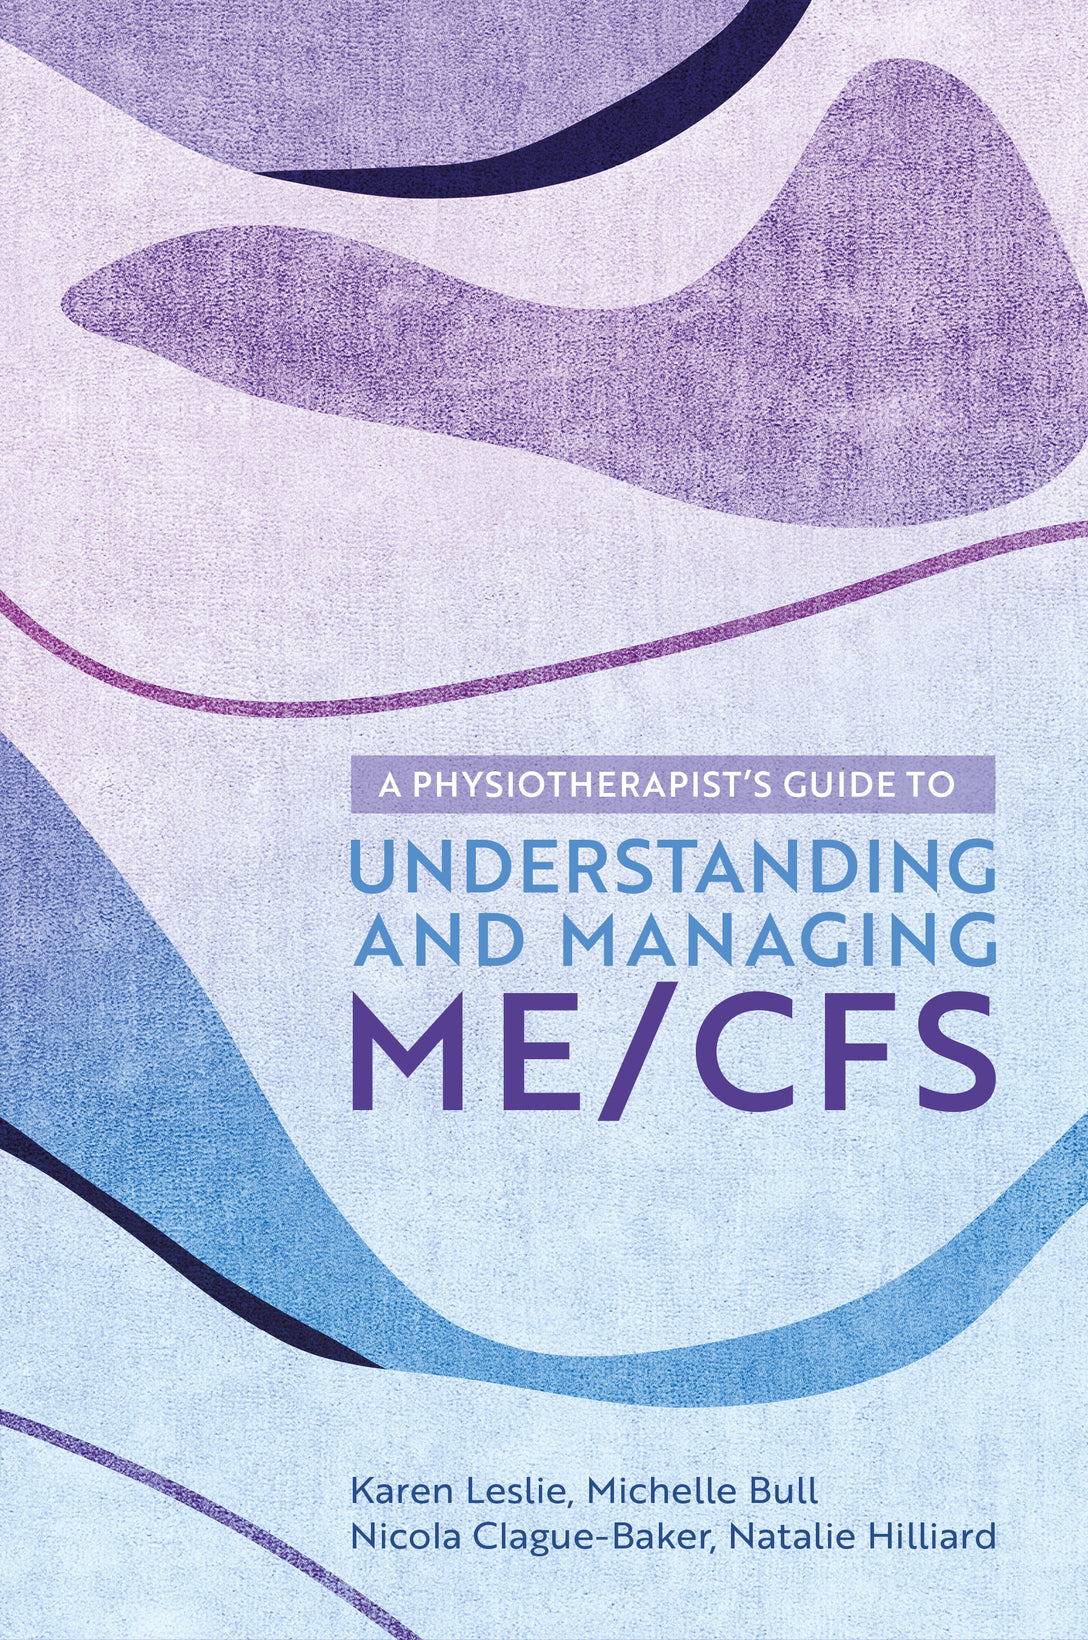 A Physiotherapist's Guide to Understanding and Managing ME/CFS by Karen Leslie, Nicola Clague-Baker, Natalie Hilliard, Michelle Bull